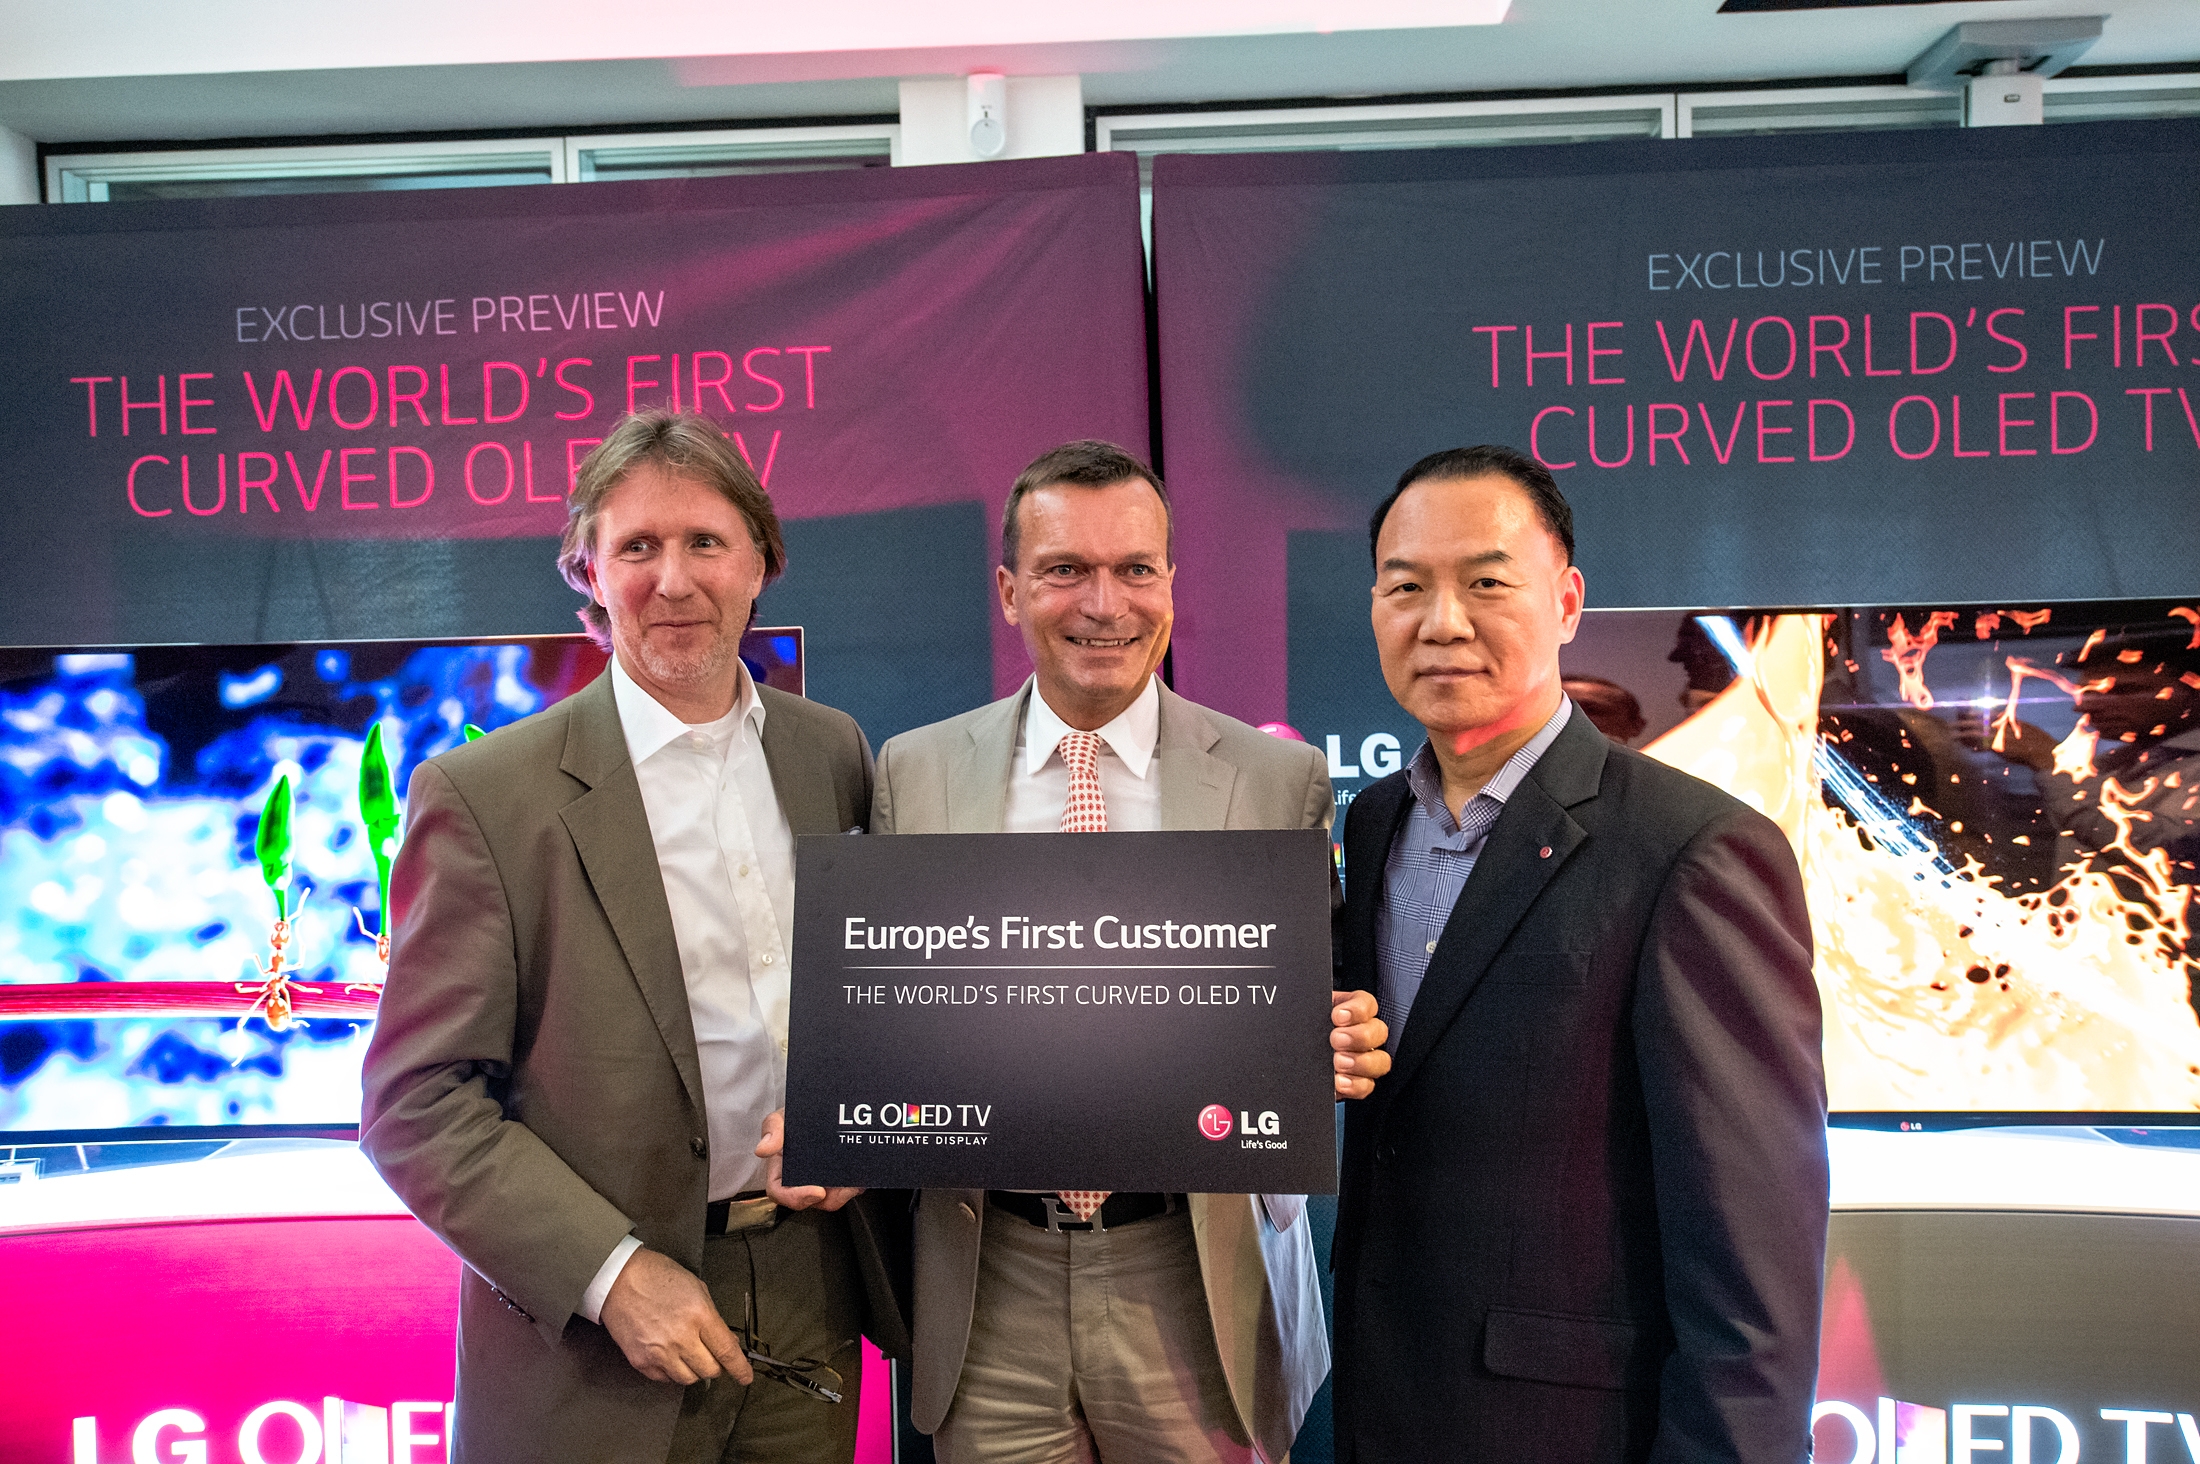 An LG representative and two German market representatives posing for the camera at the exclusive preview of the world’s first curved OLED TV.